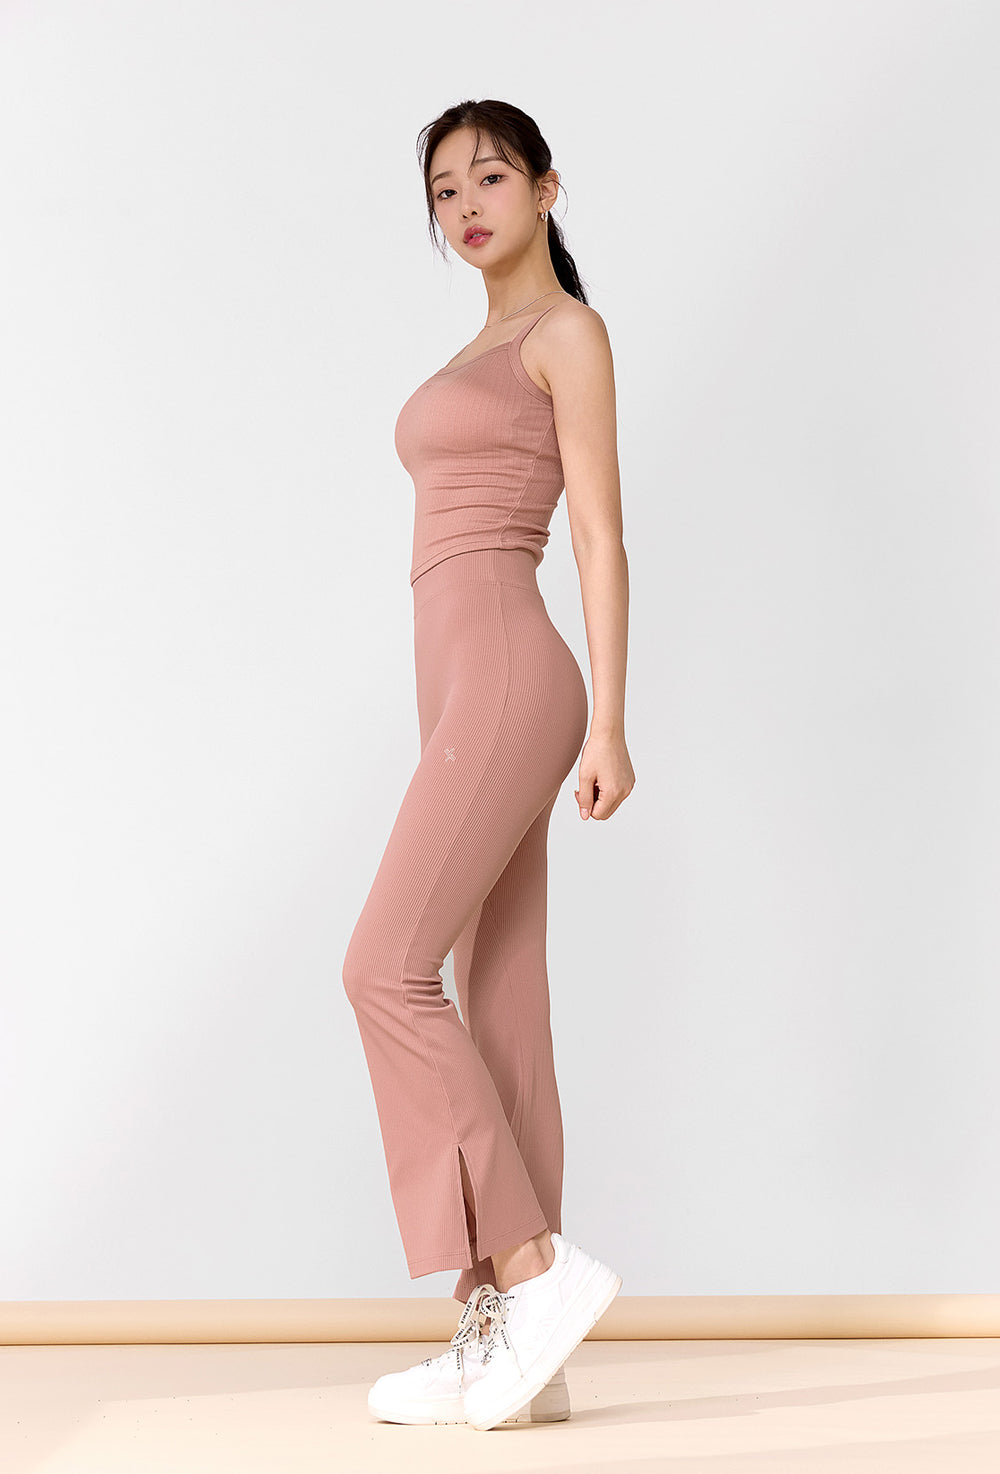 Ribbed Tension In pad Sleeveless - Baroque Rose